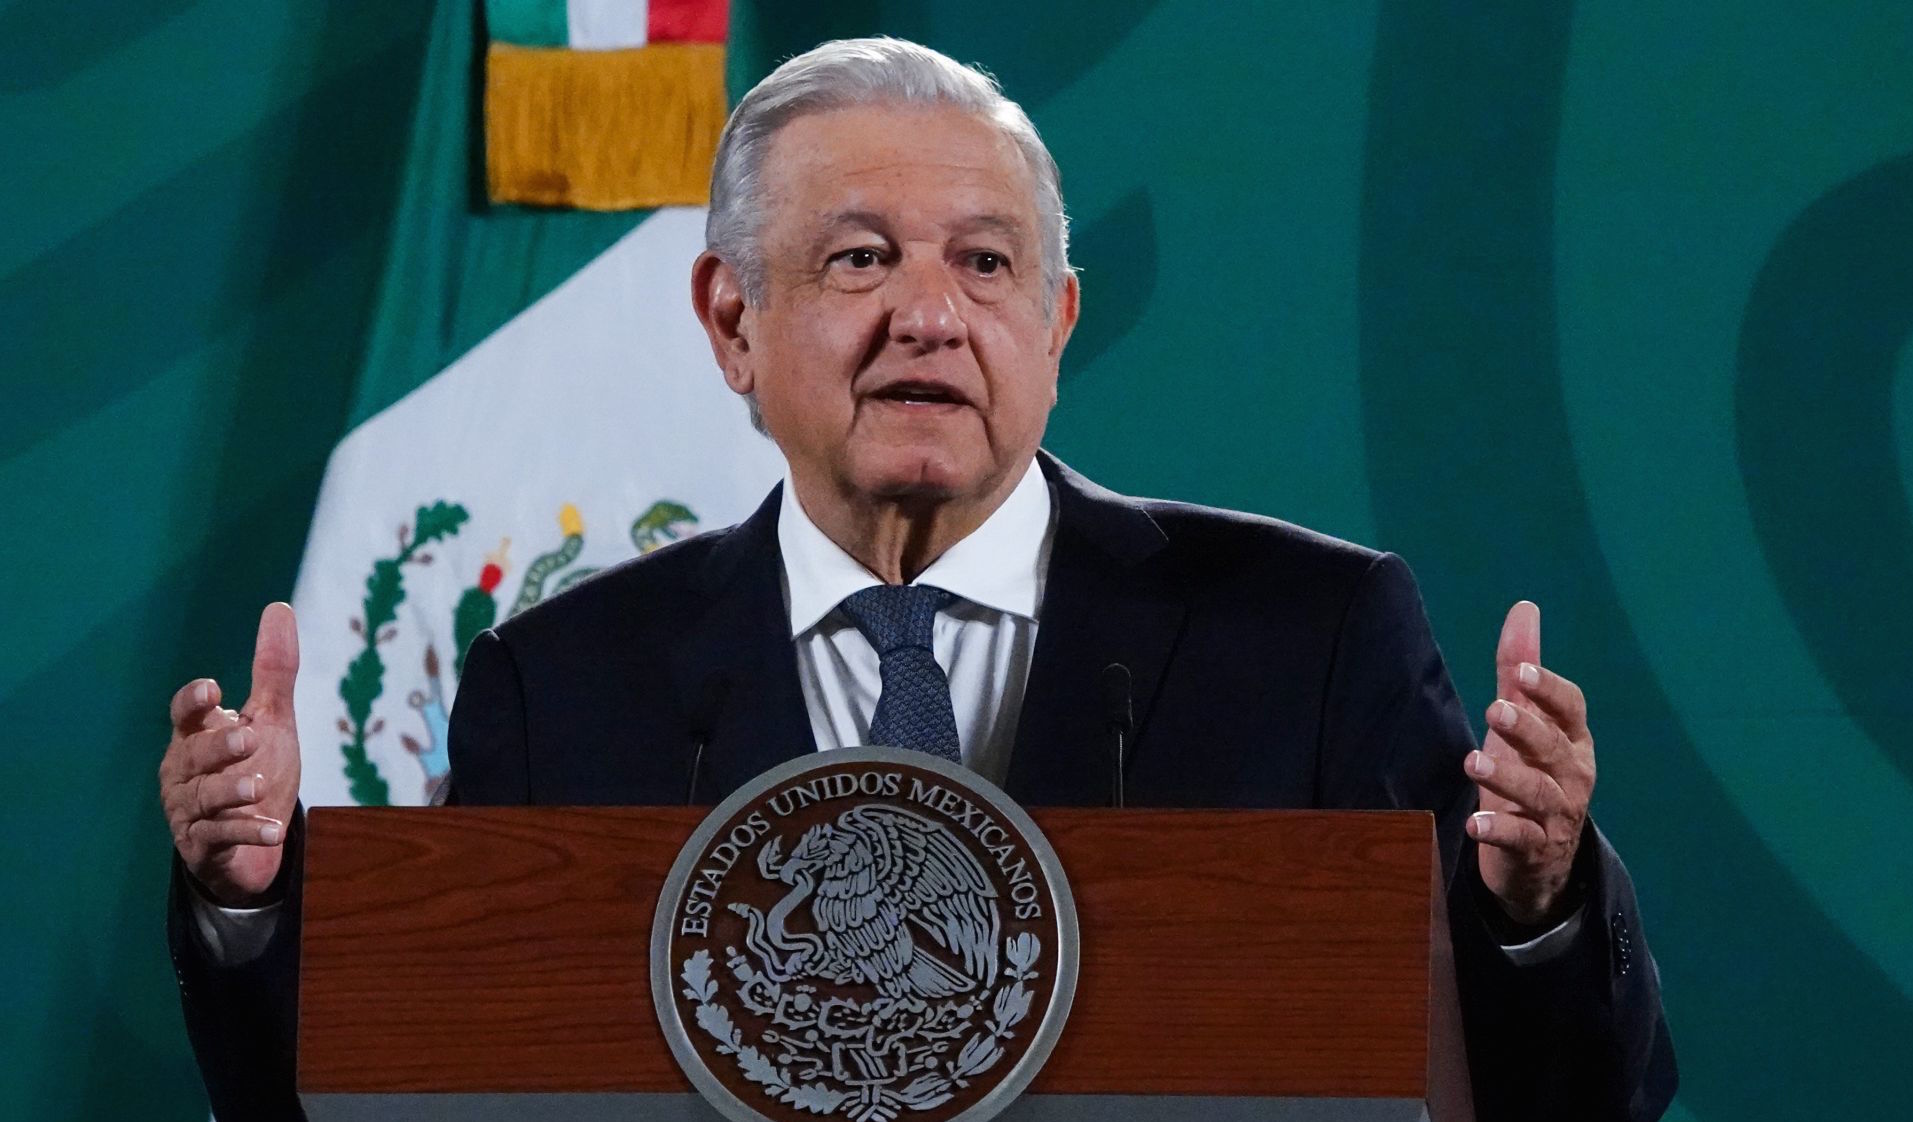 'Do you think I'm going to trust the Judiciary? It's rotten,' says AMLO